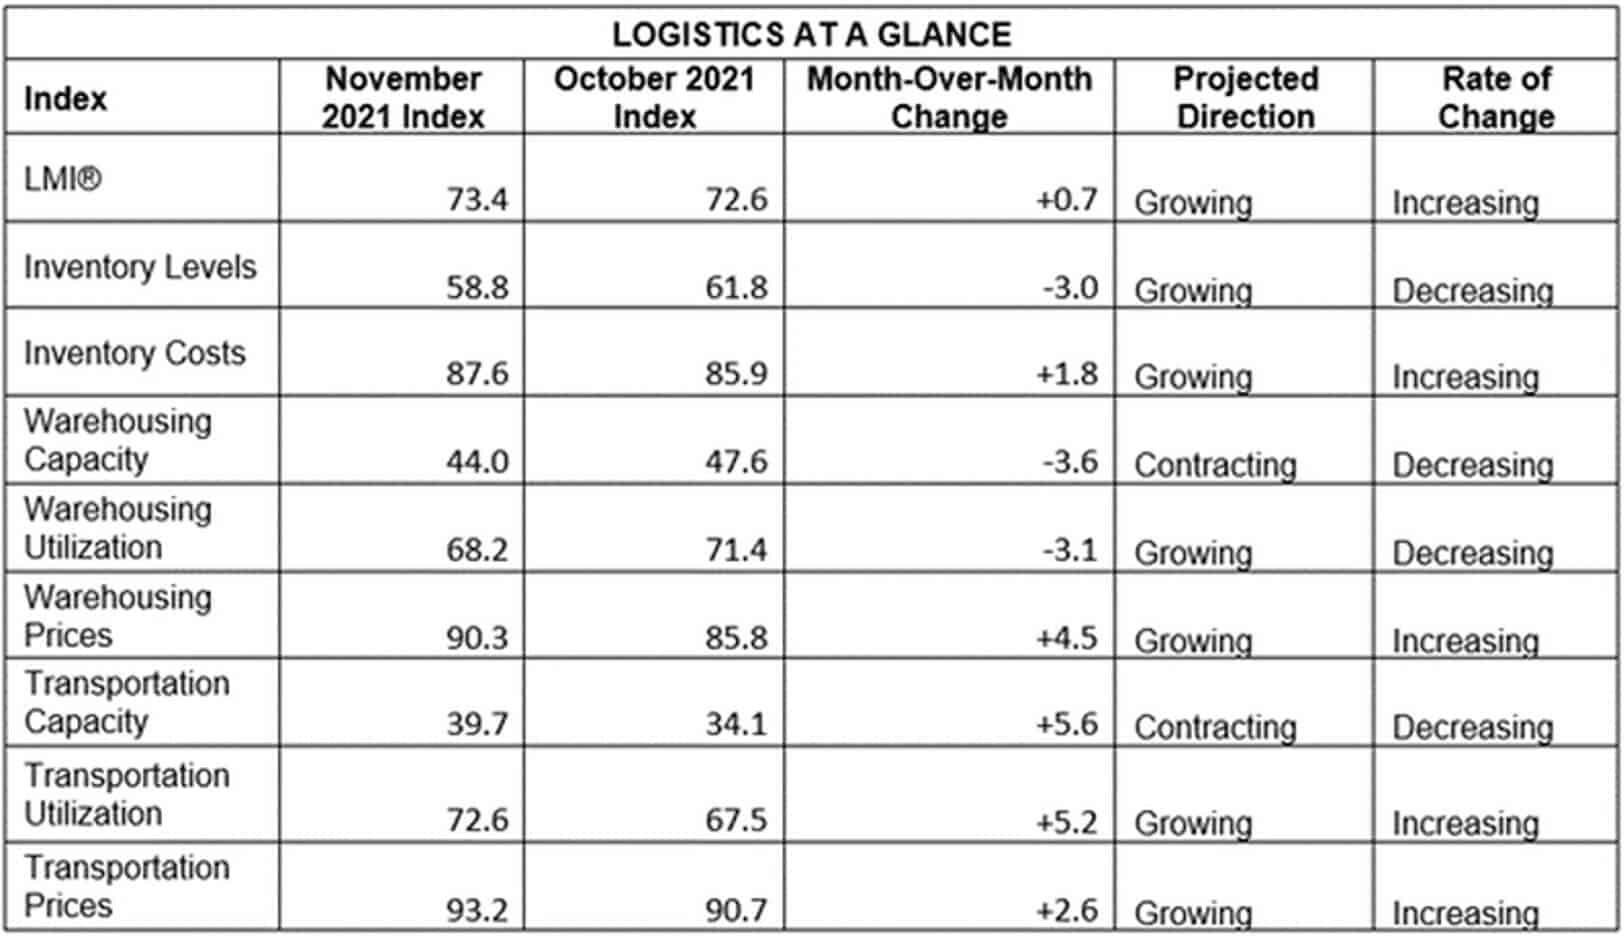 Logistics at a Glance chart depicting various indices, month-over-month change from October 2021 to November 2021, projected direction and rate of change.